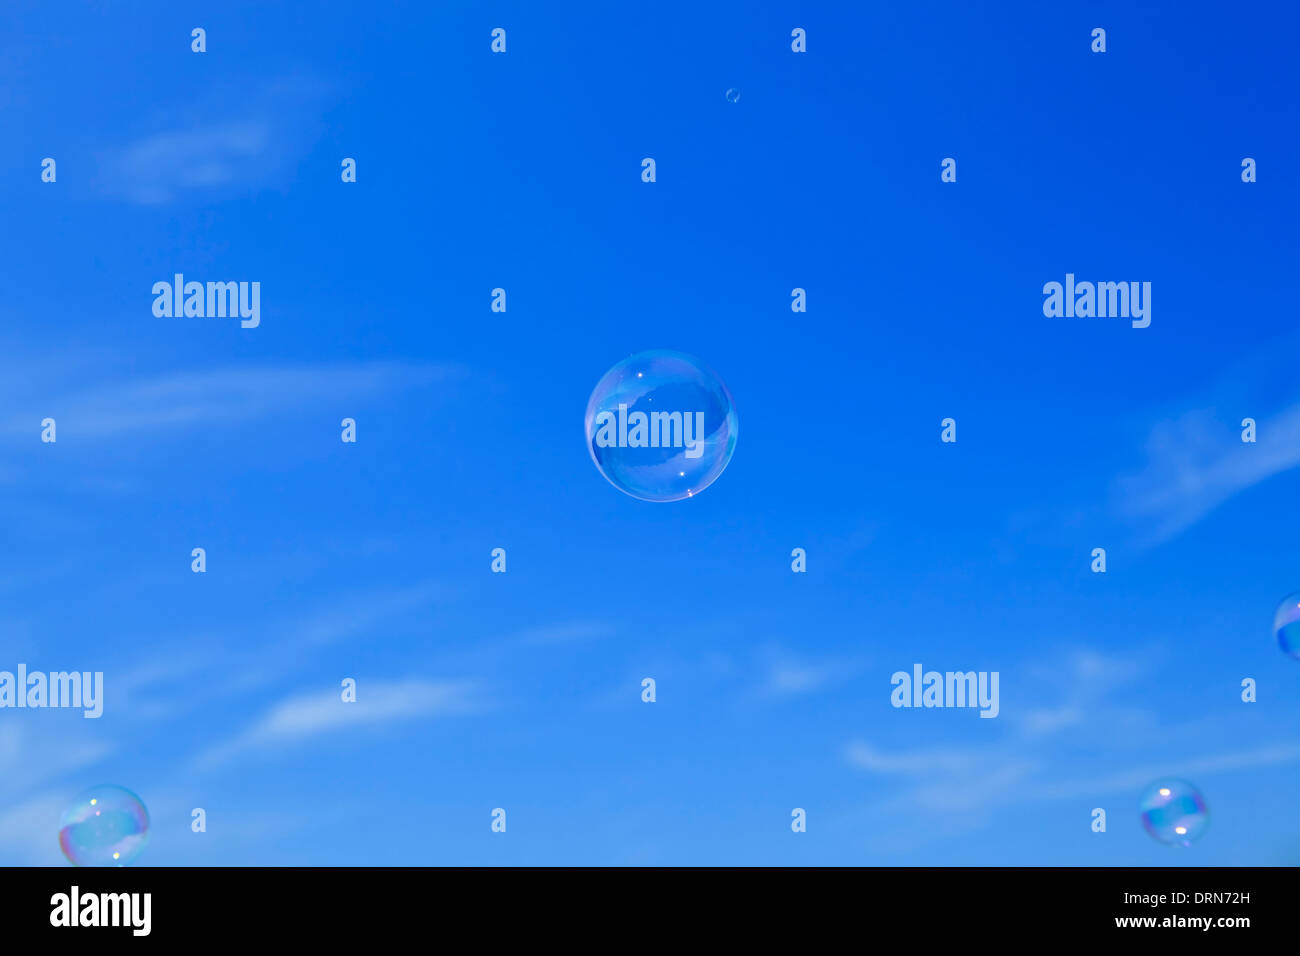 Soap bubbles floating in the blue sky Stock Photo